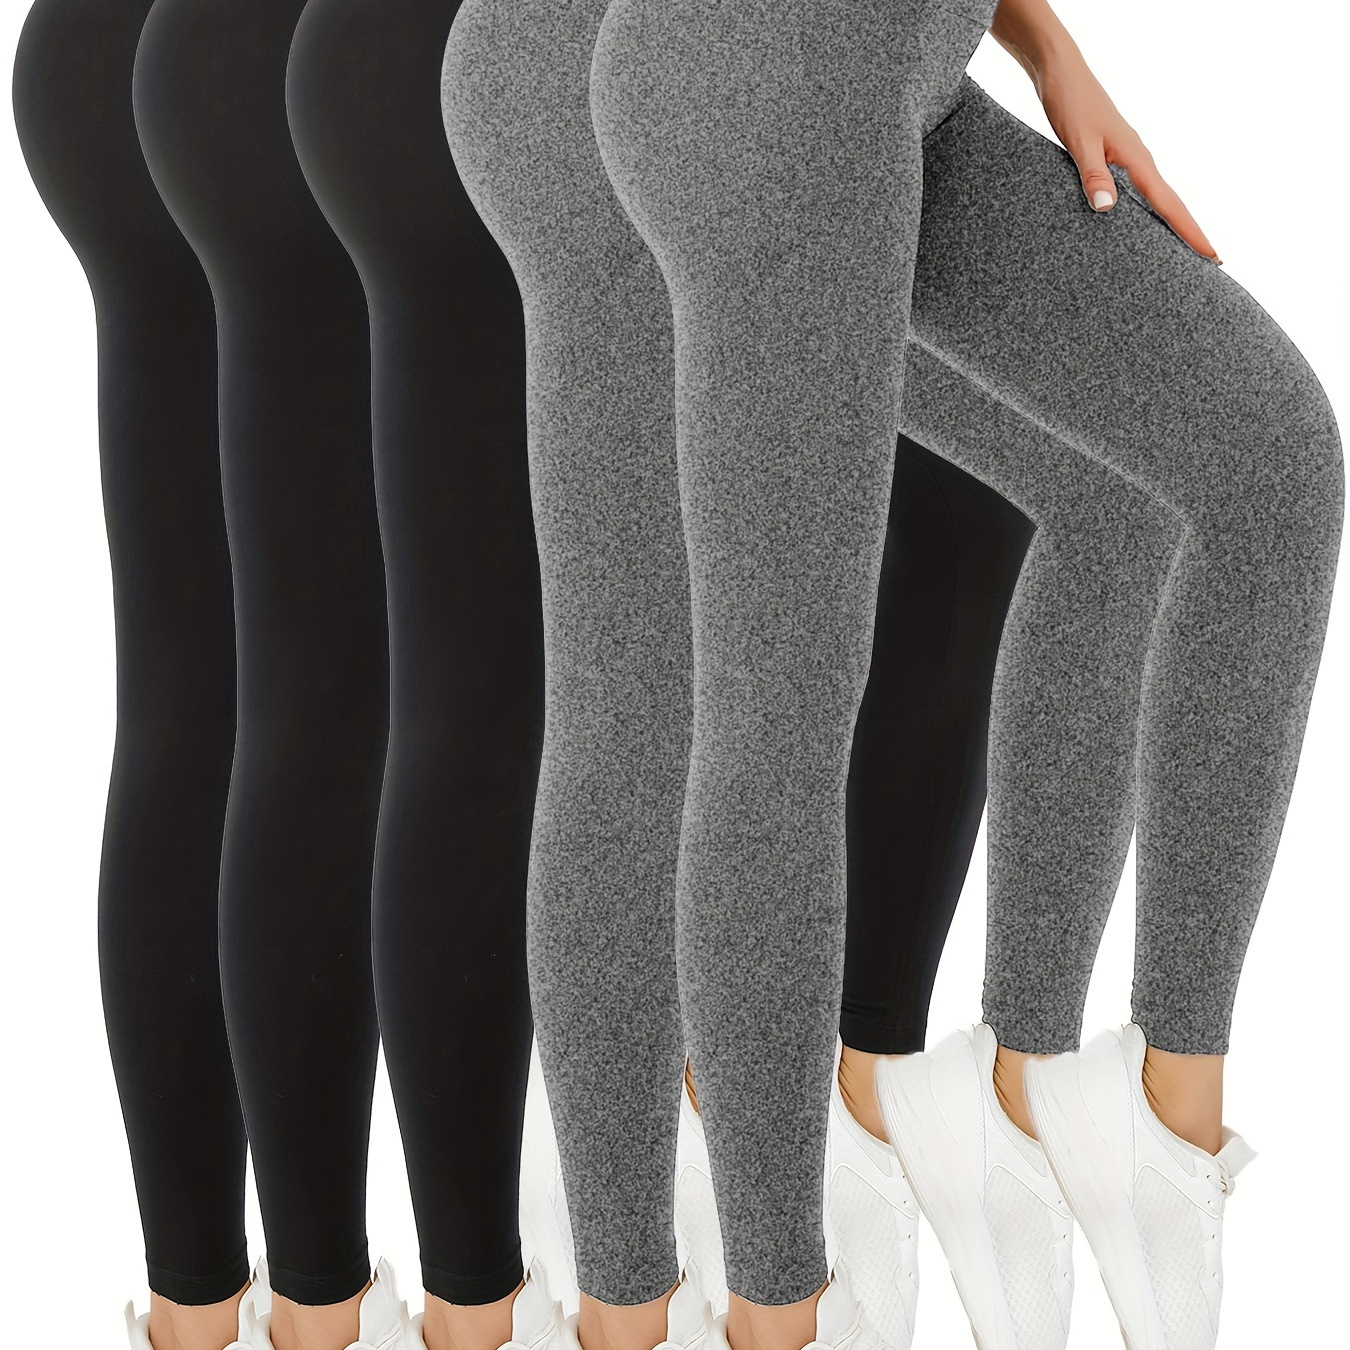 

5-pack High Waisted Leggings For Women - Super Soft, Tummy Control, Non-see-through, Stretch Yoga Running Pants, Casual Athletic Workout Leggings For Fall & Winter